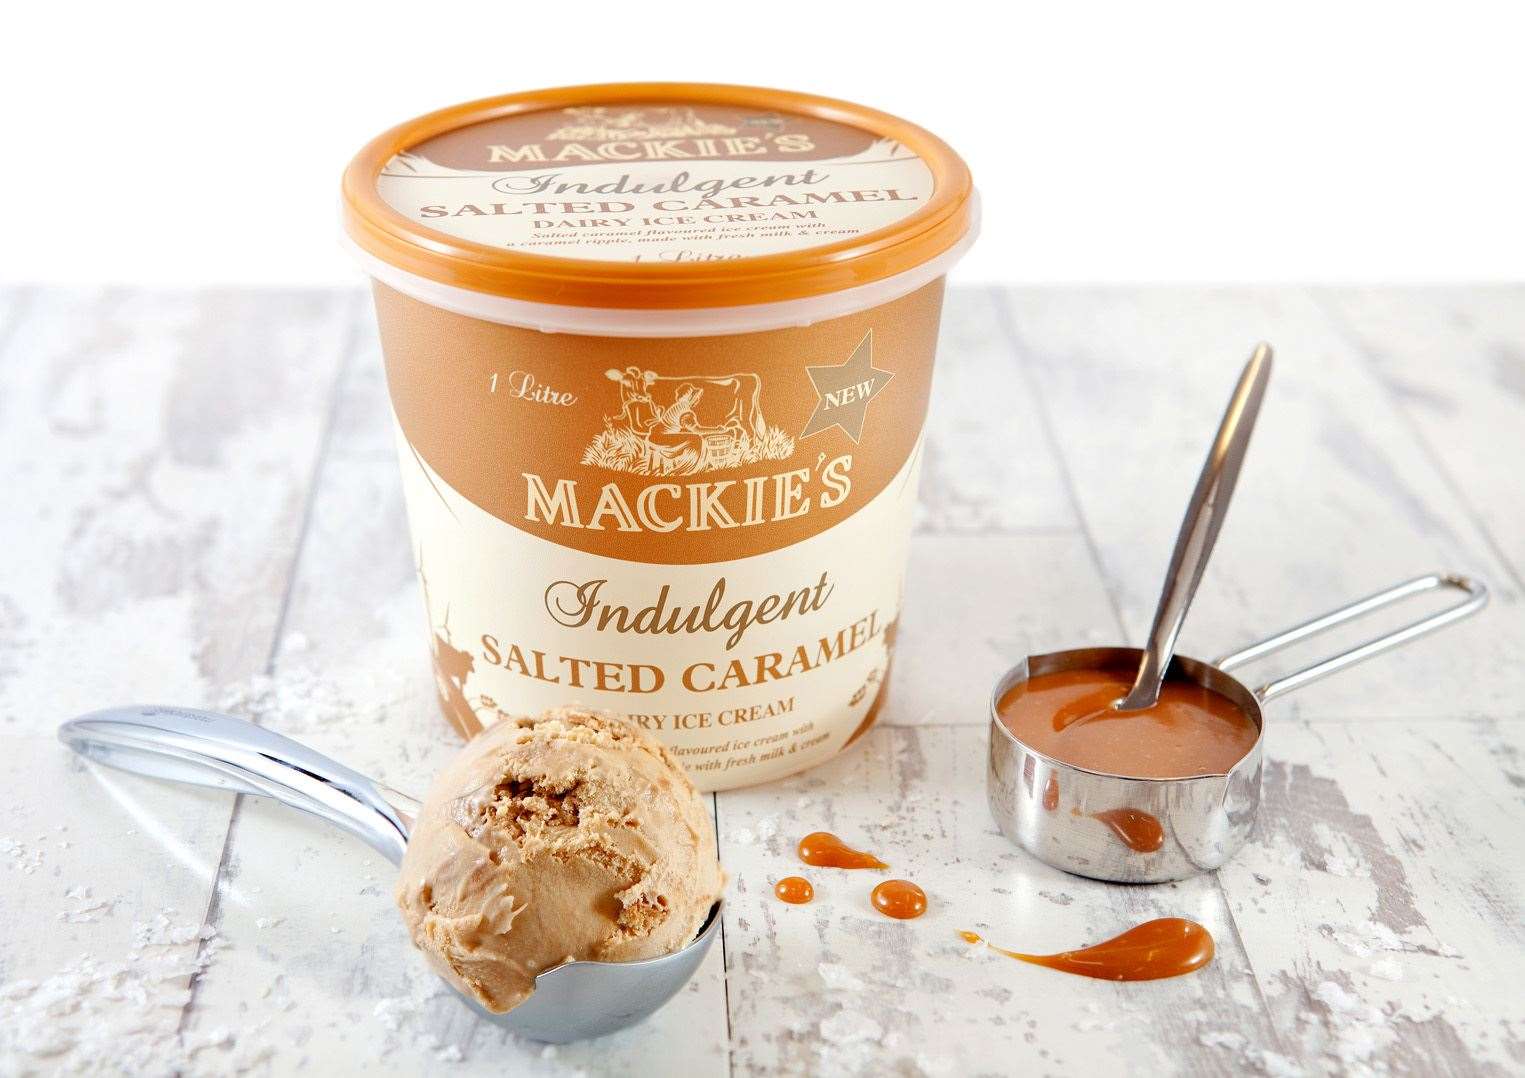 The salted caramel ice cream produced by Mackie's of Scotland won in the Great Taste Awards.